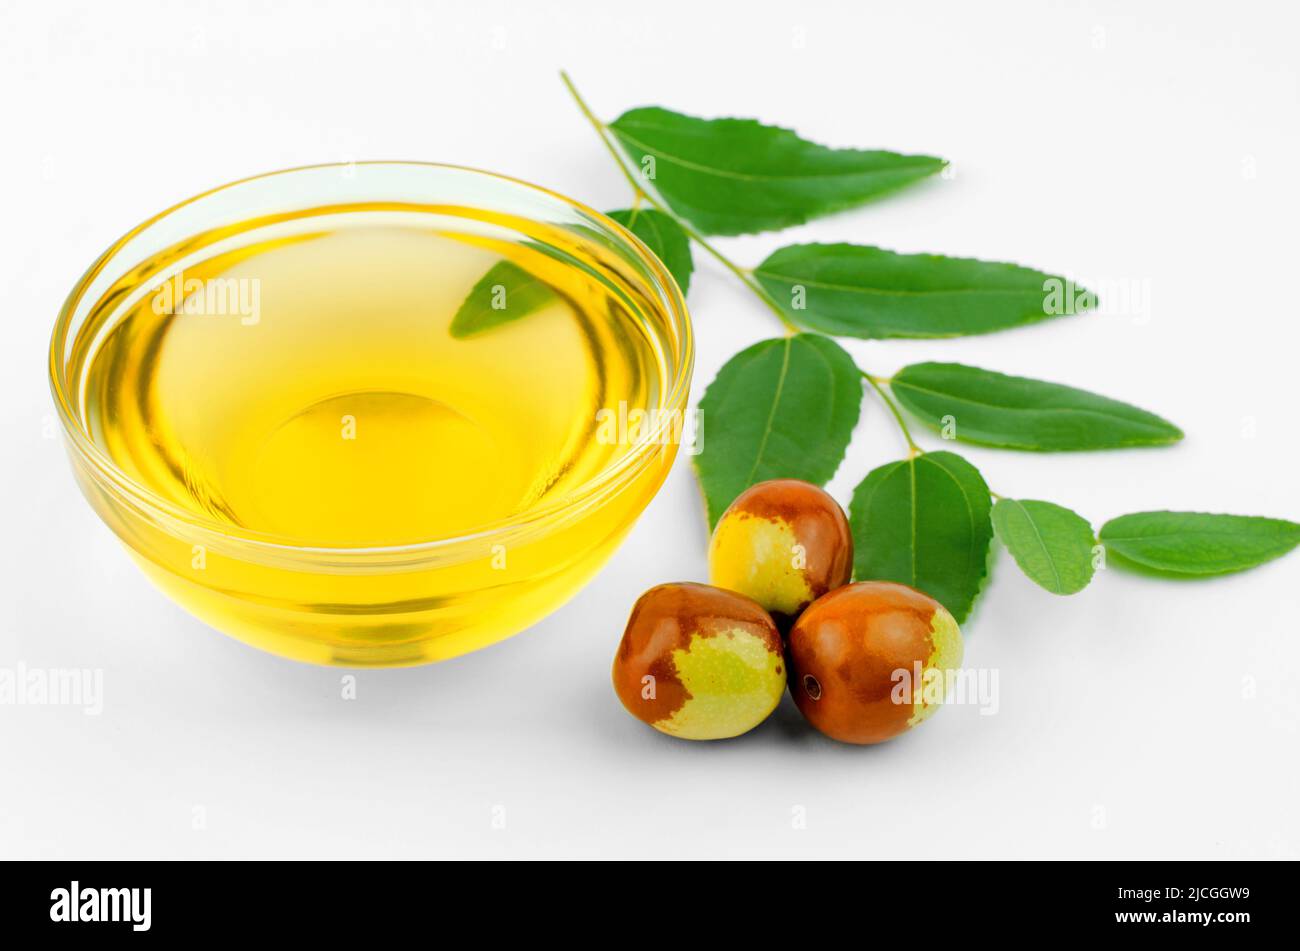 Bowl with jojoba oil, ripe fruits and green leaves on white background Stock Photo